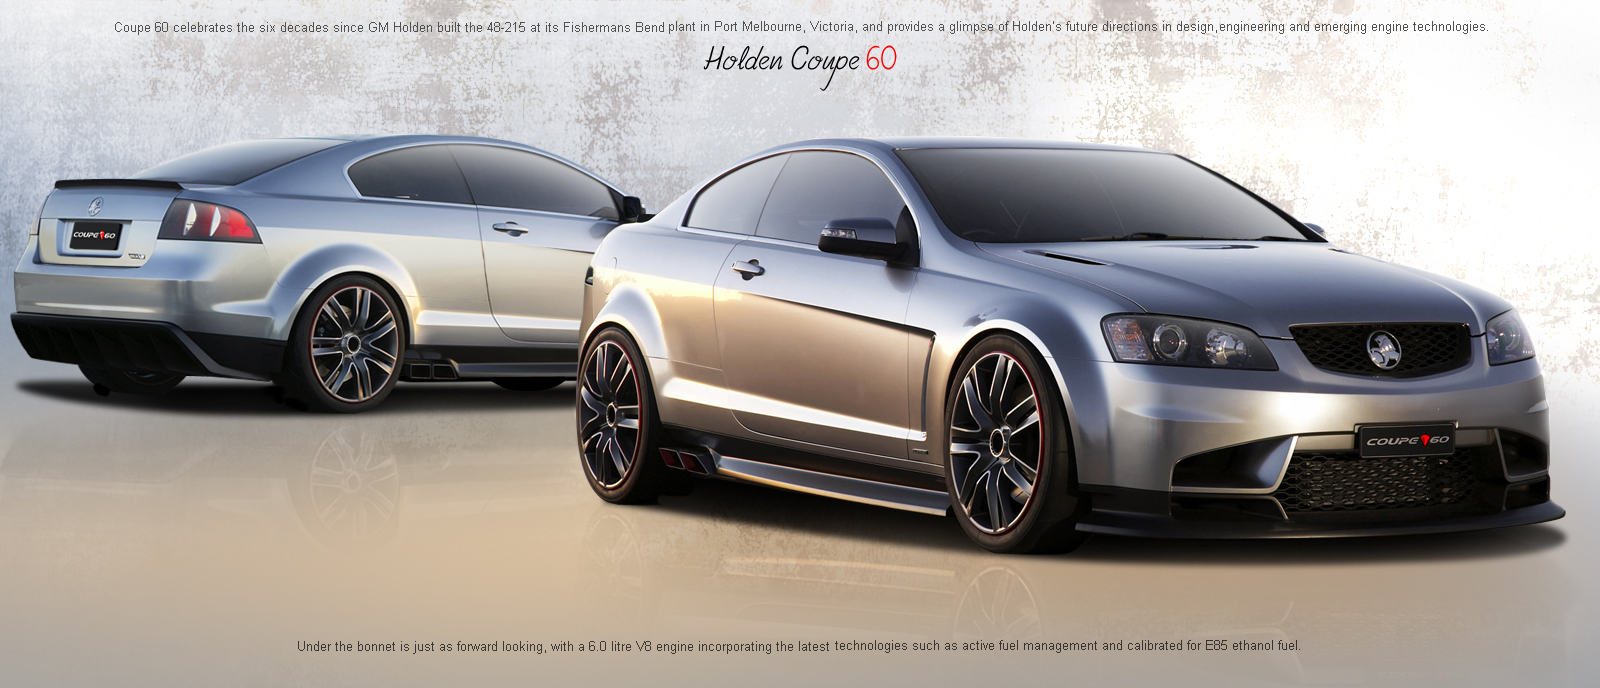 Nice wallpapers Holden Coupe 60 Concept 1600x688px